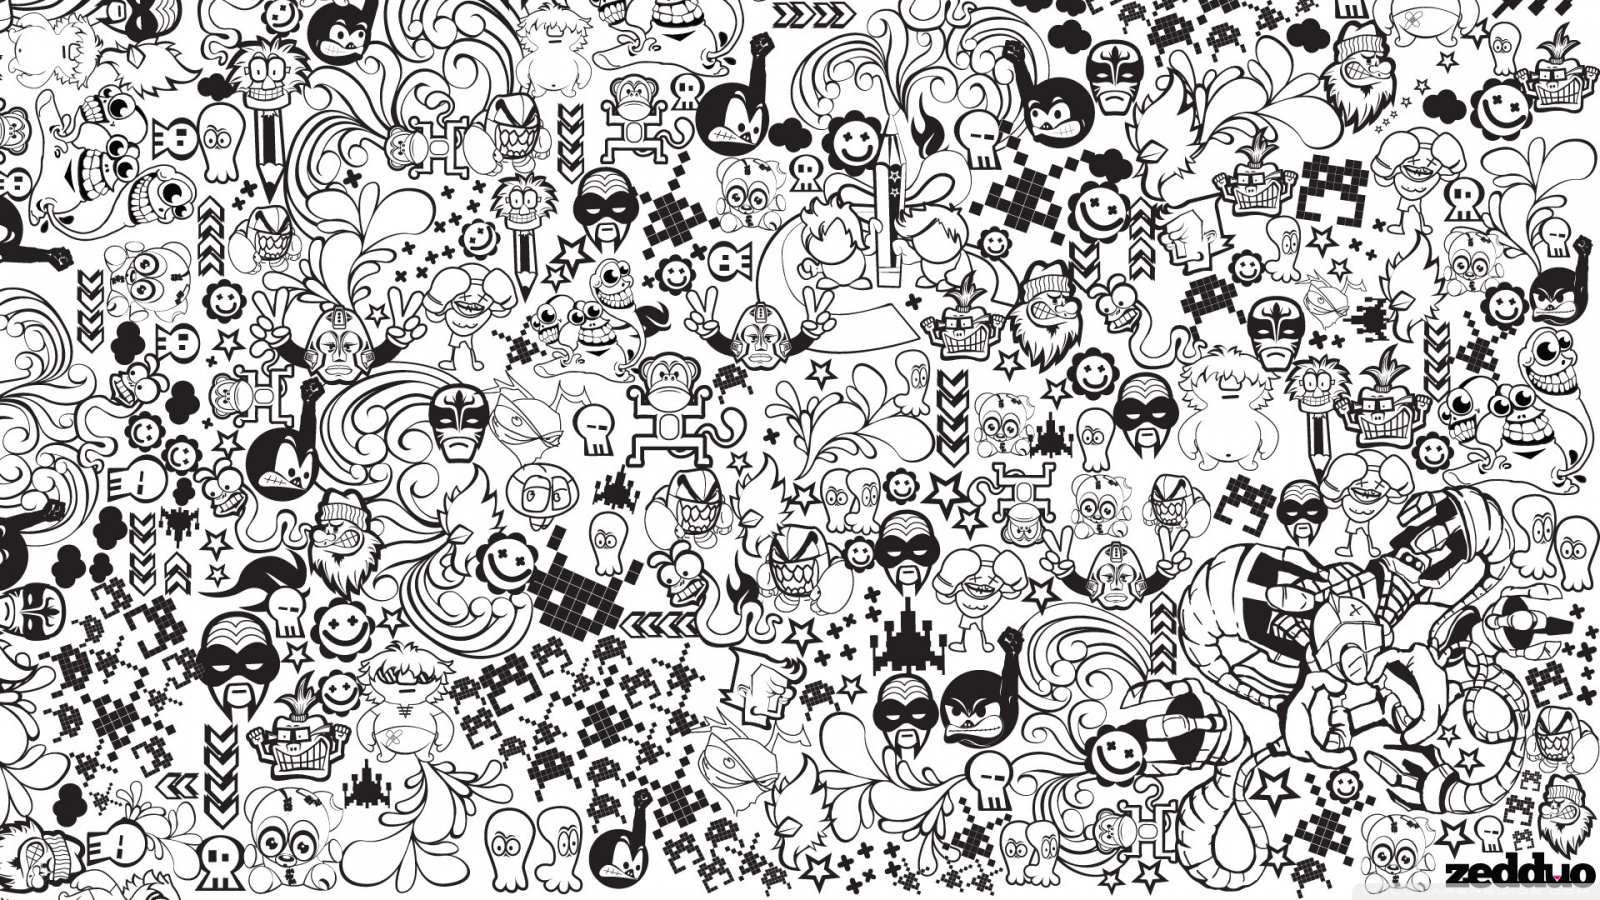 Mickey mouse wallpaper black and white